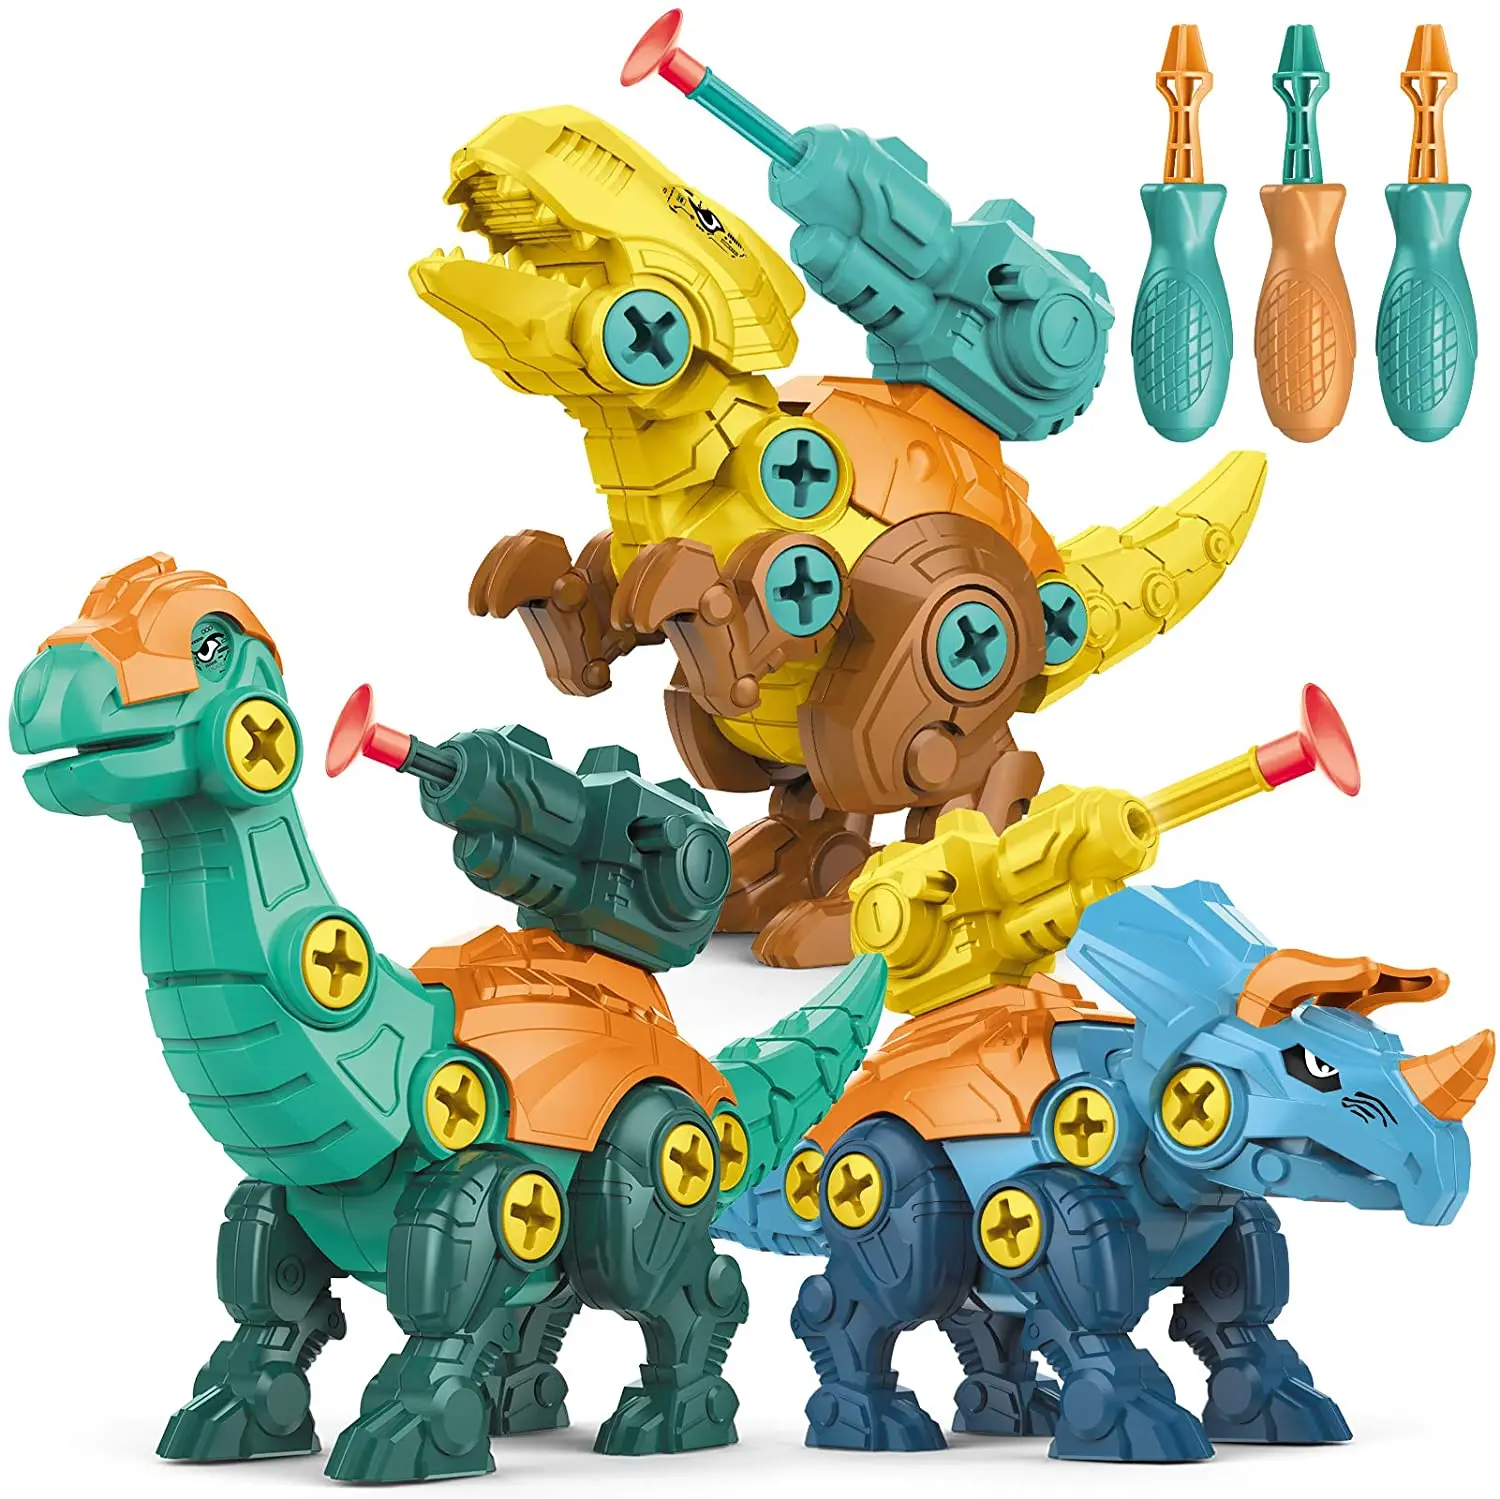 Take Apart Dinosaur Toys for Kids with Missile Fire, 3 Packs DIY Dinosaur  Educational STEM Toys with Screwdrivers Learning Gift